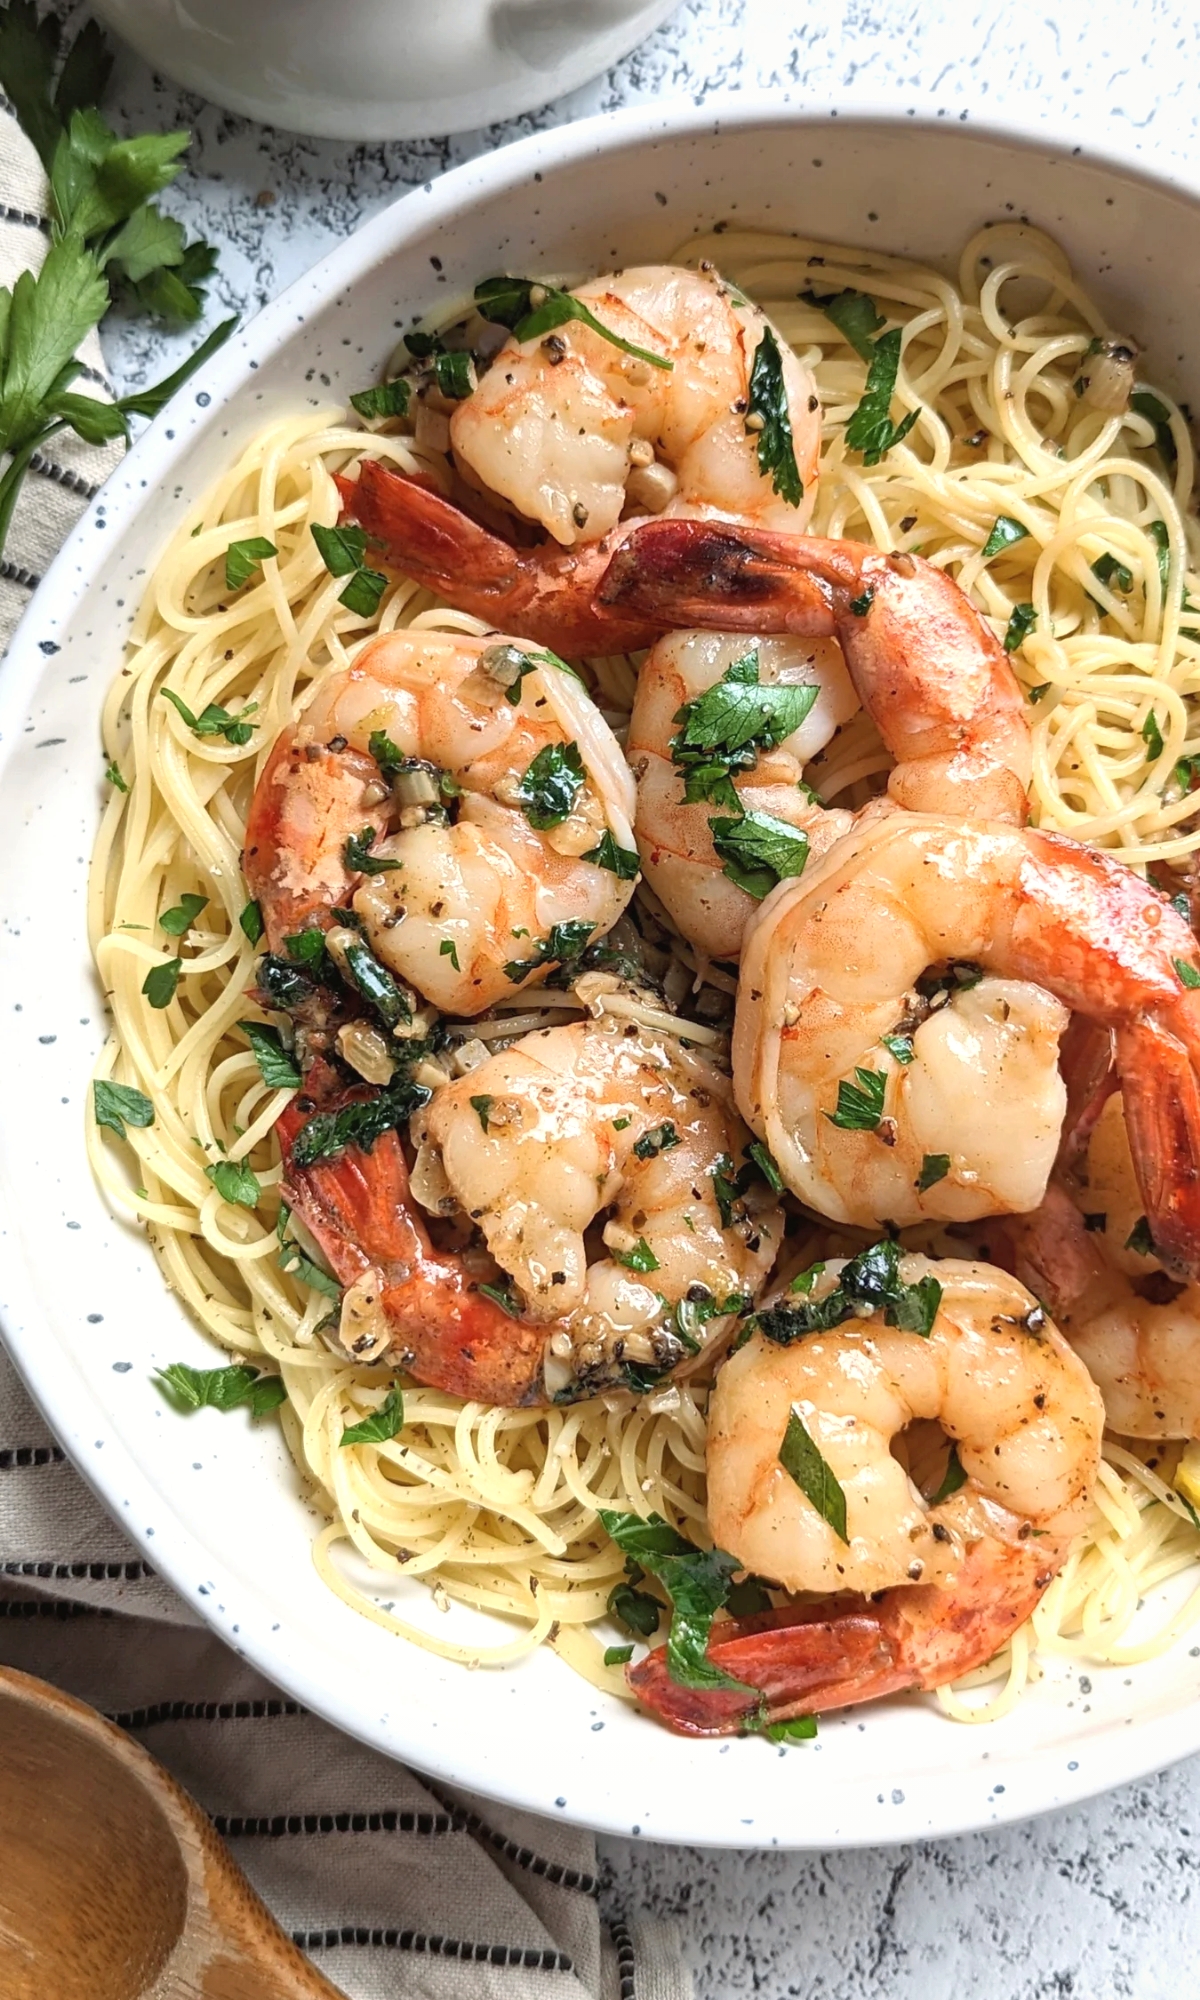 shrimp scampi no wine with garlic lemon parsley on angel hair pasta keto low carb gluten free summer grilling ideas